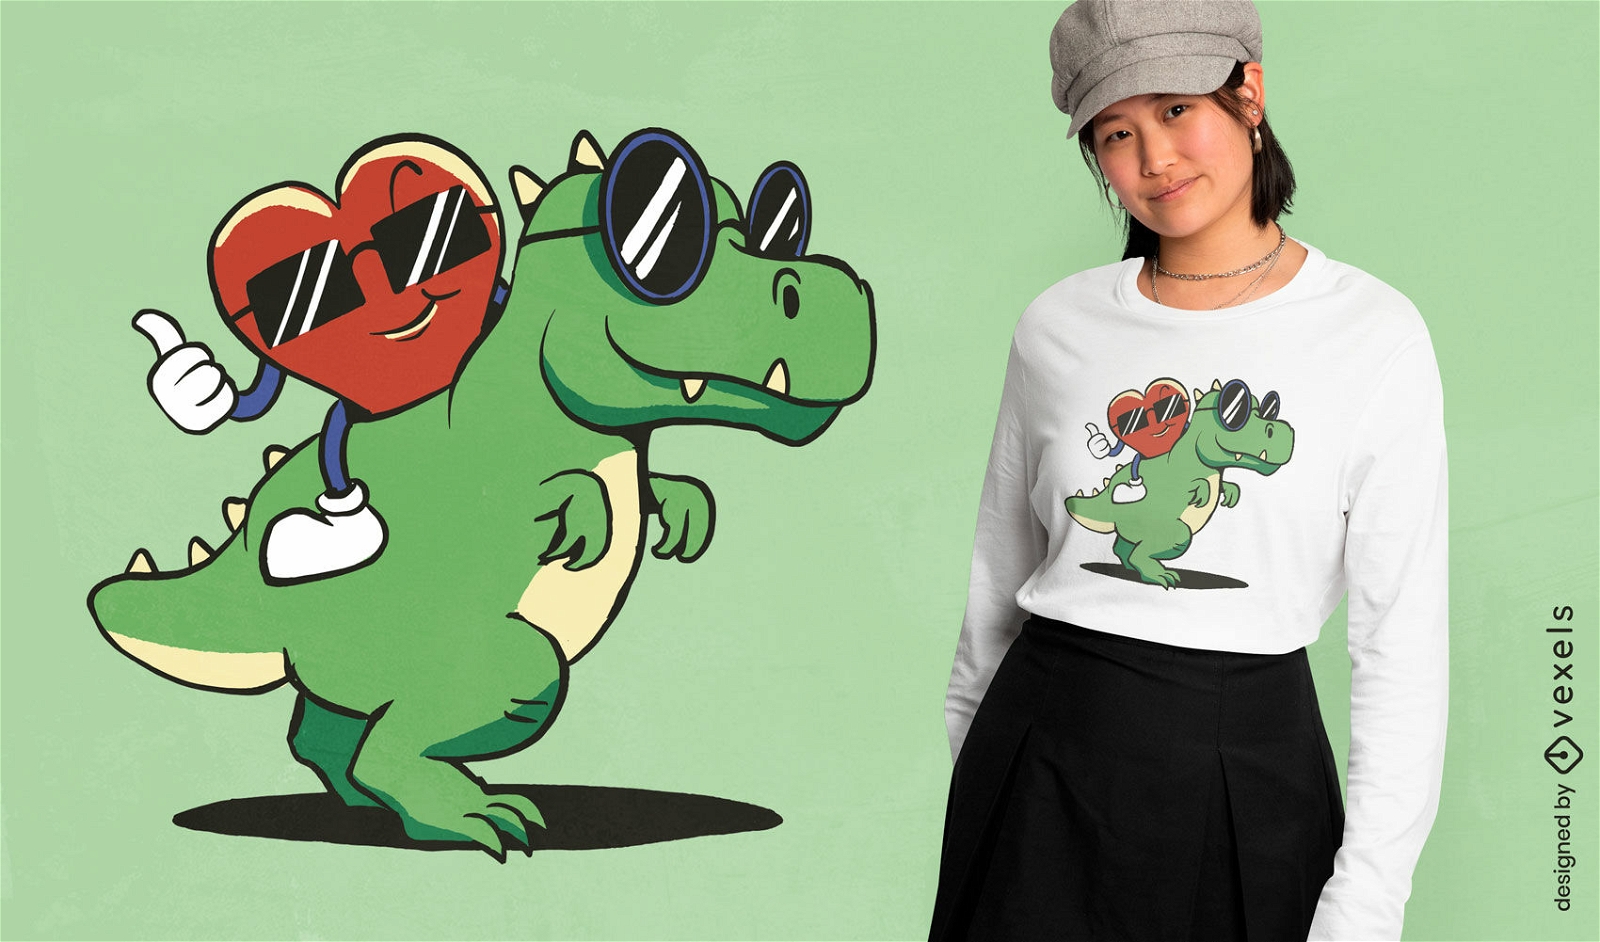 Cool dinosaur and heart in sunglasses t-shirt design